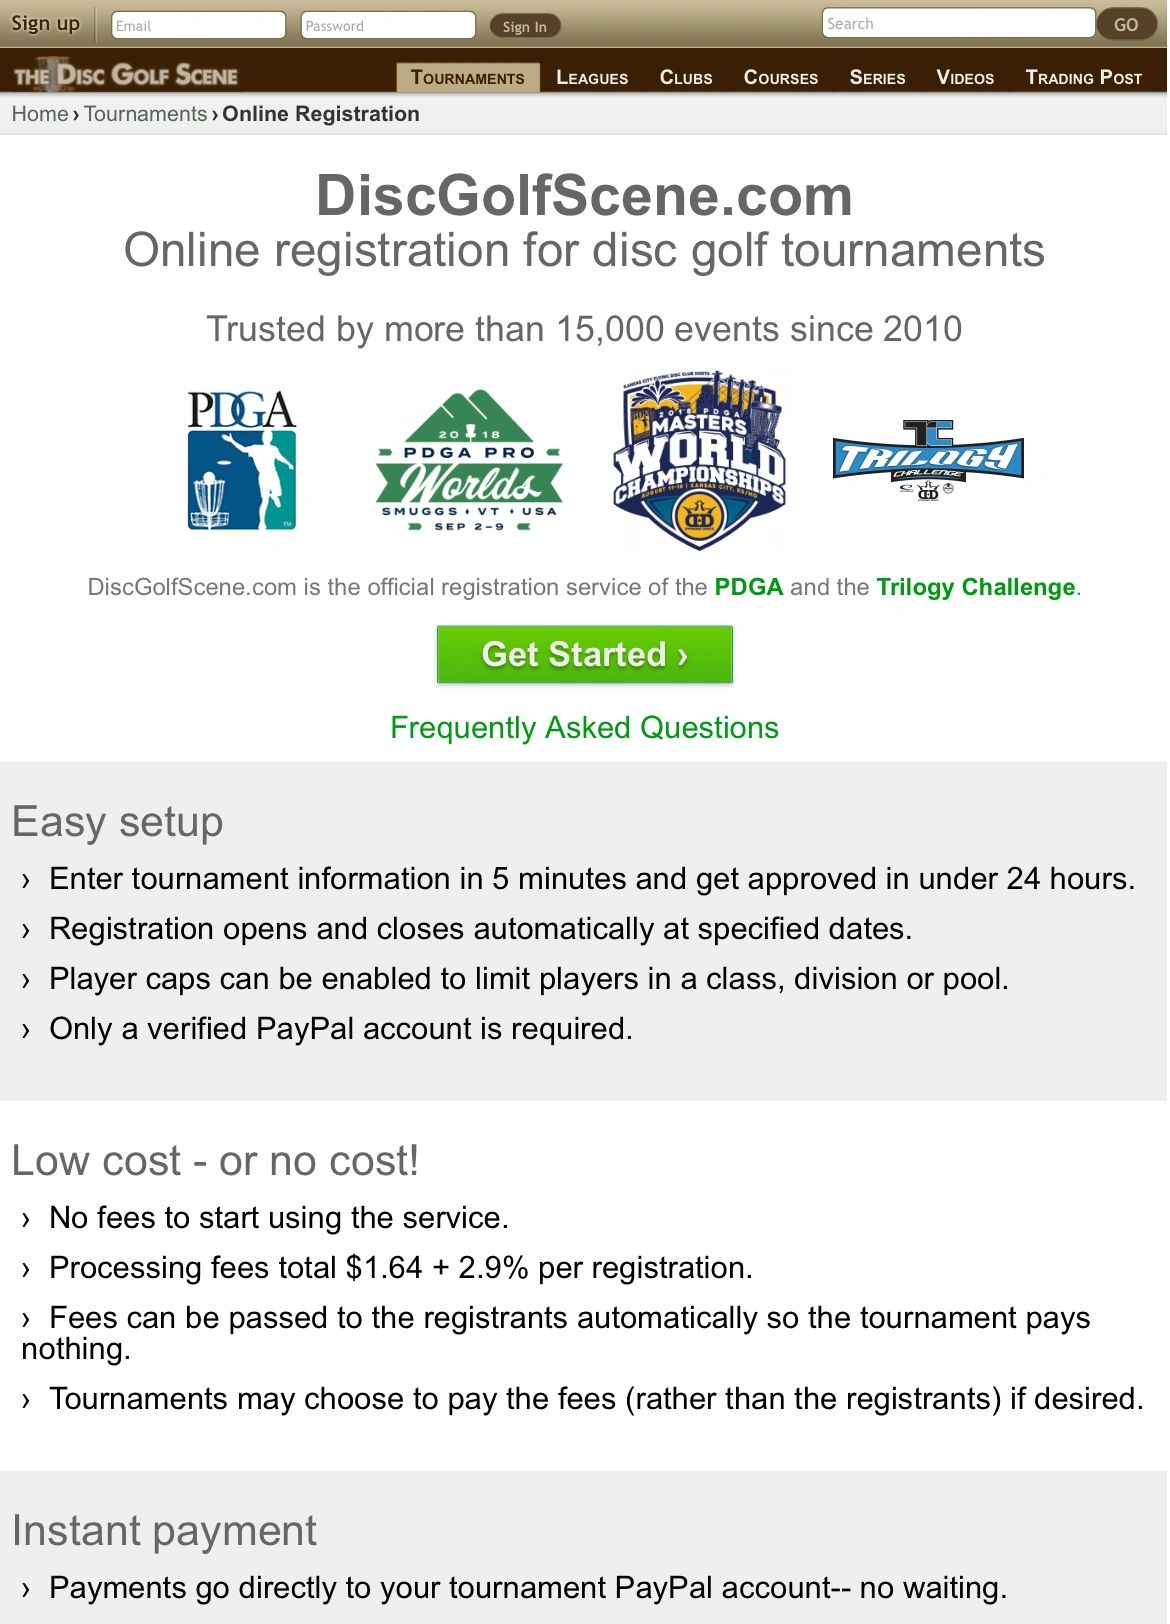 How To Host a Successful Disc Golf Tournament